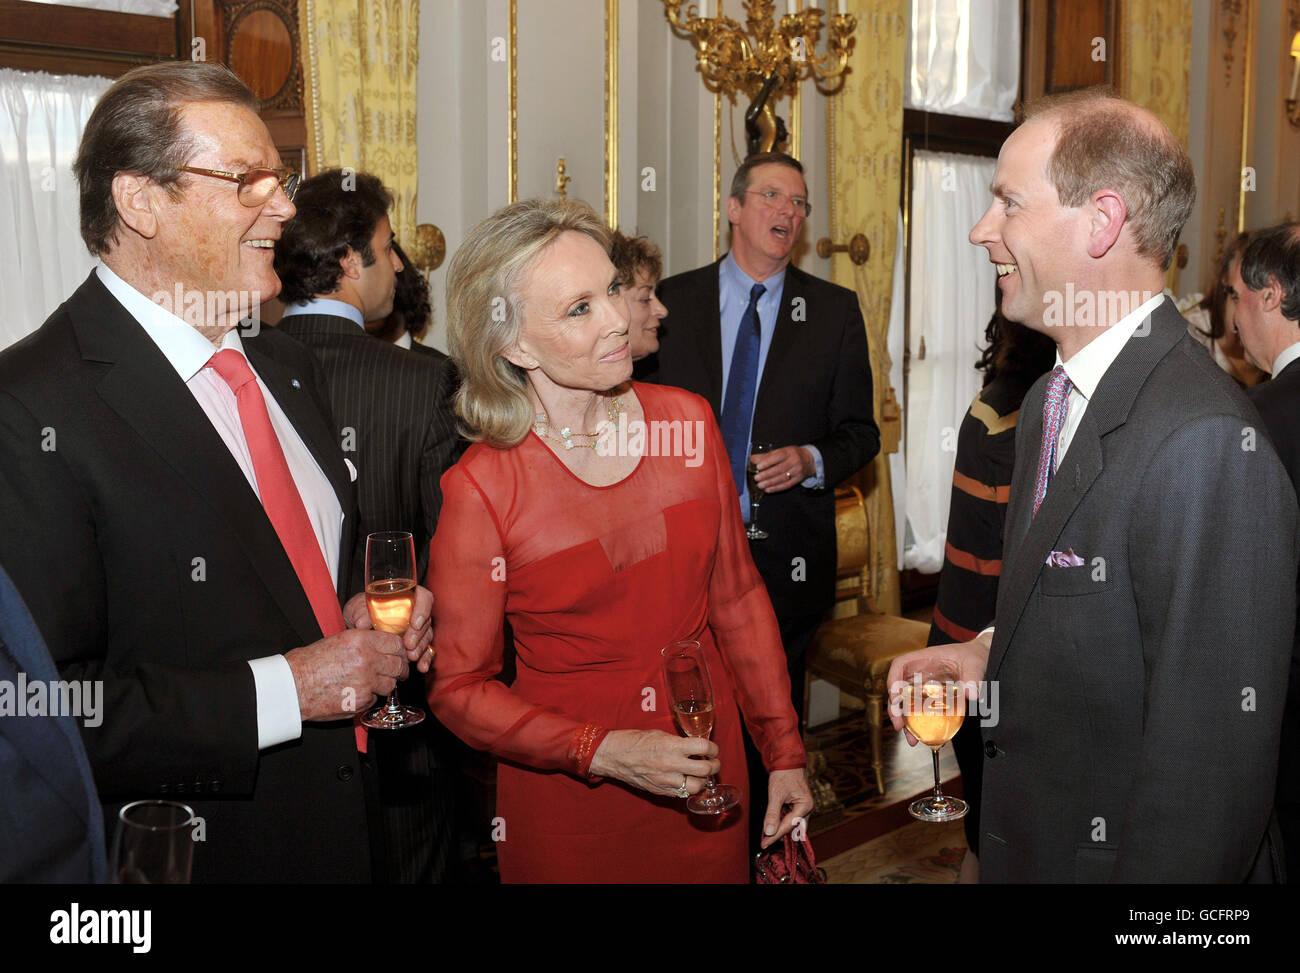 The Earl of Wessex (right) talks with Sir Roger Moore and his wife Kristina, at a drinks reception for the 'Film without Borders' charity at Buckingham Palace in central London. Stock Photo